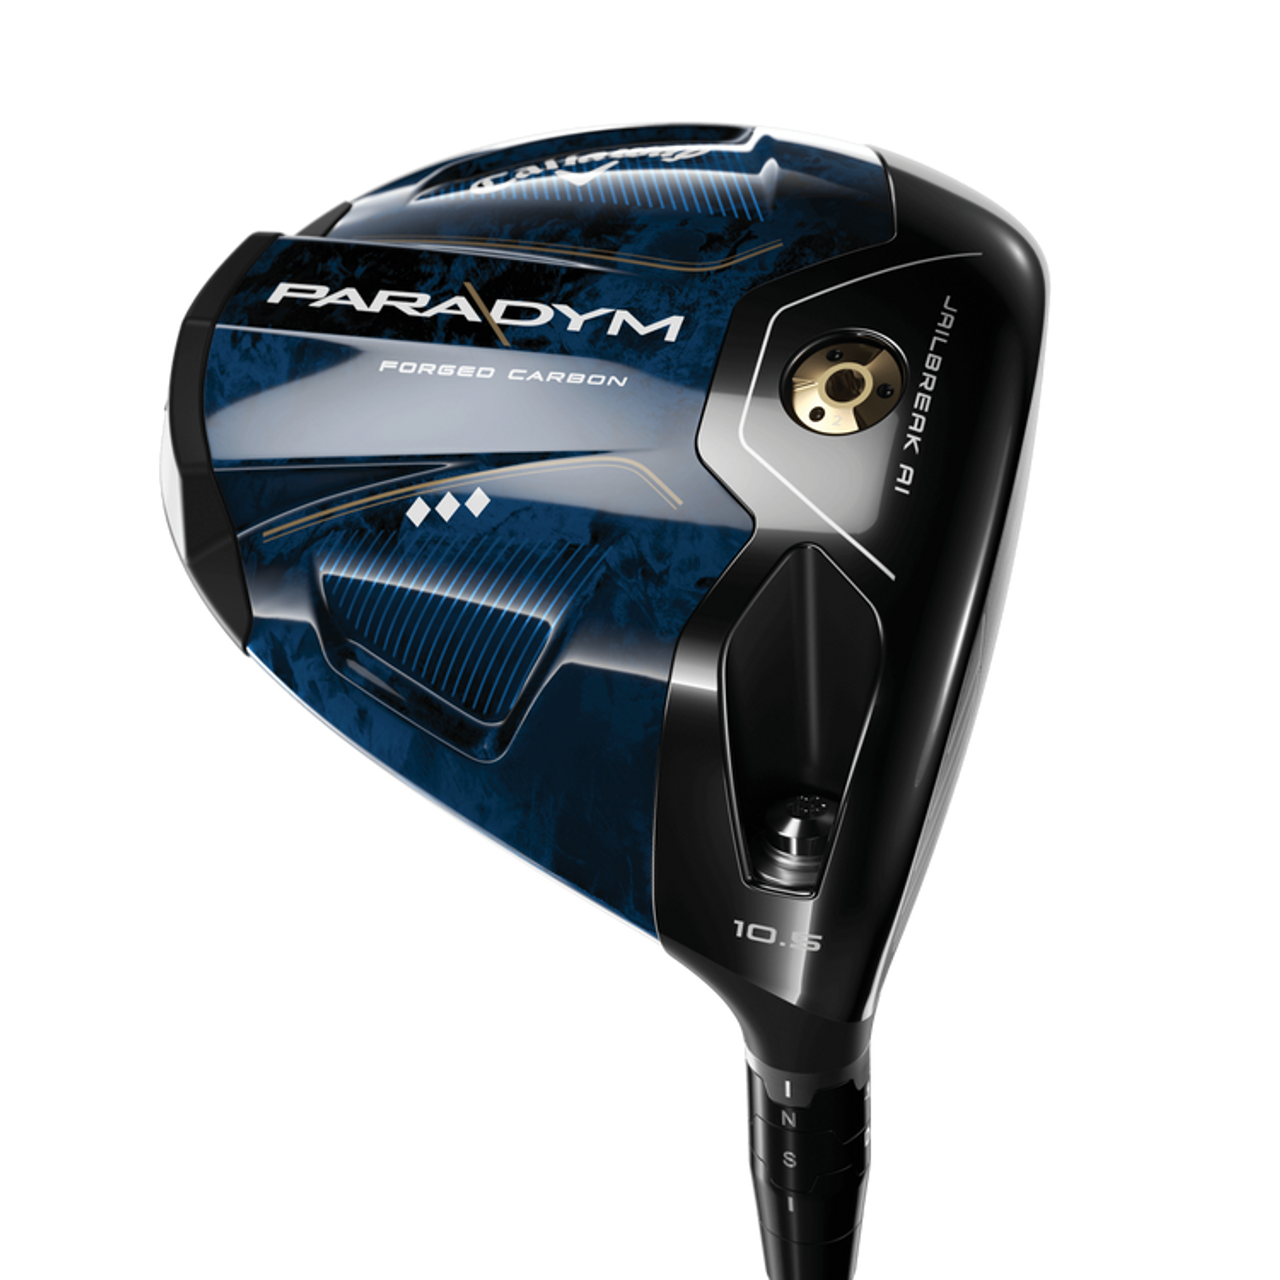 Callaway Gift Cards, Specs, Reviews & Videos